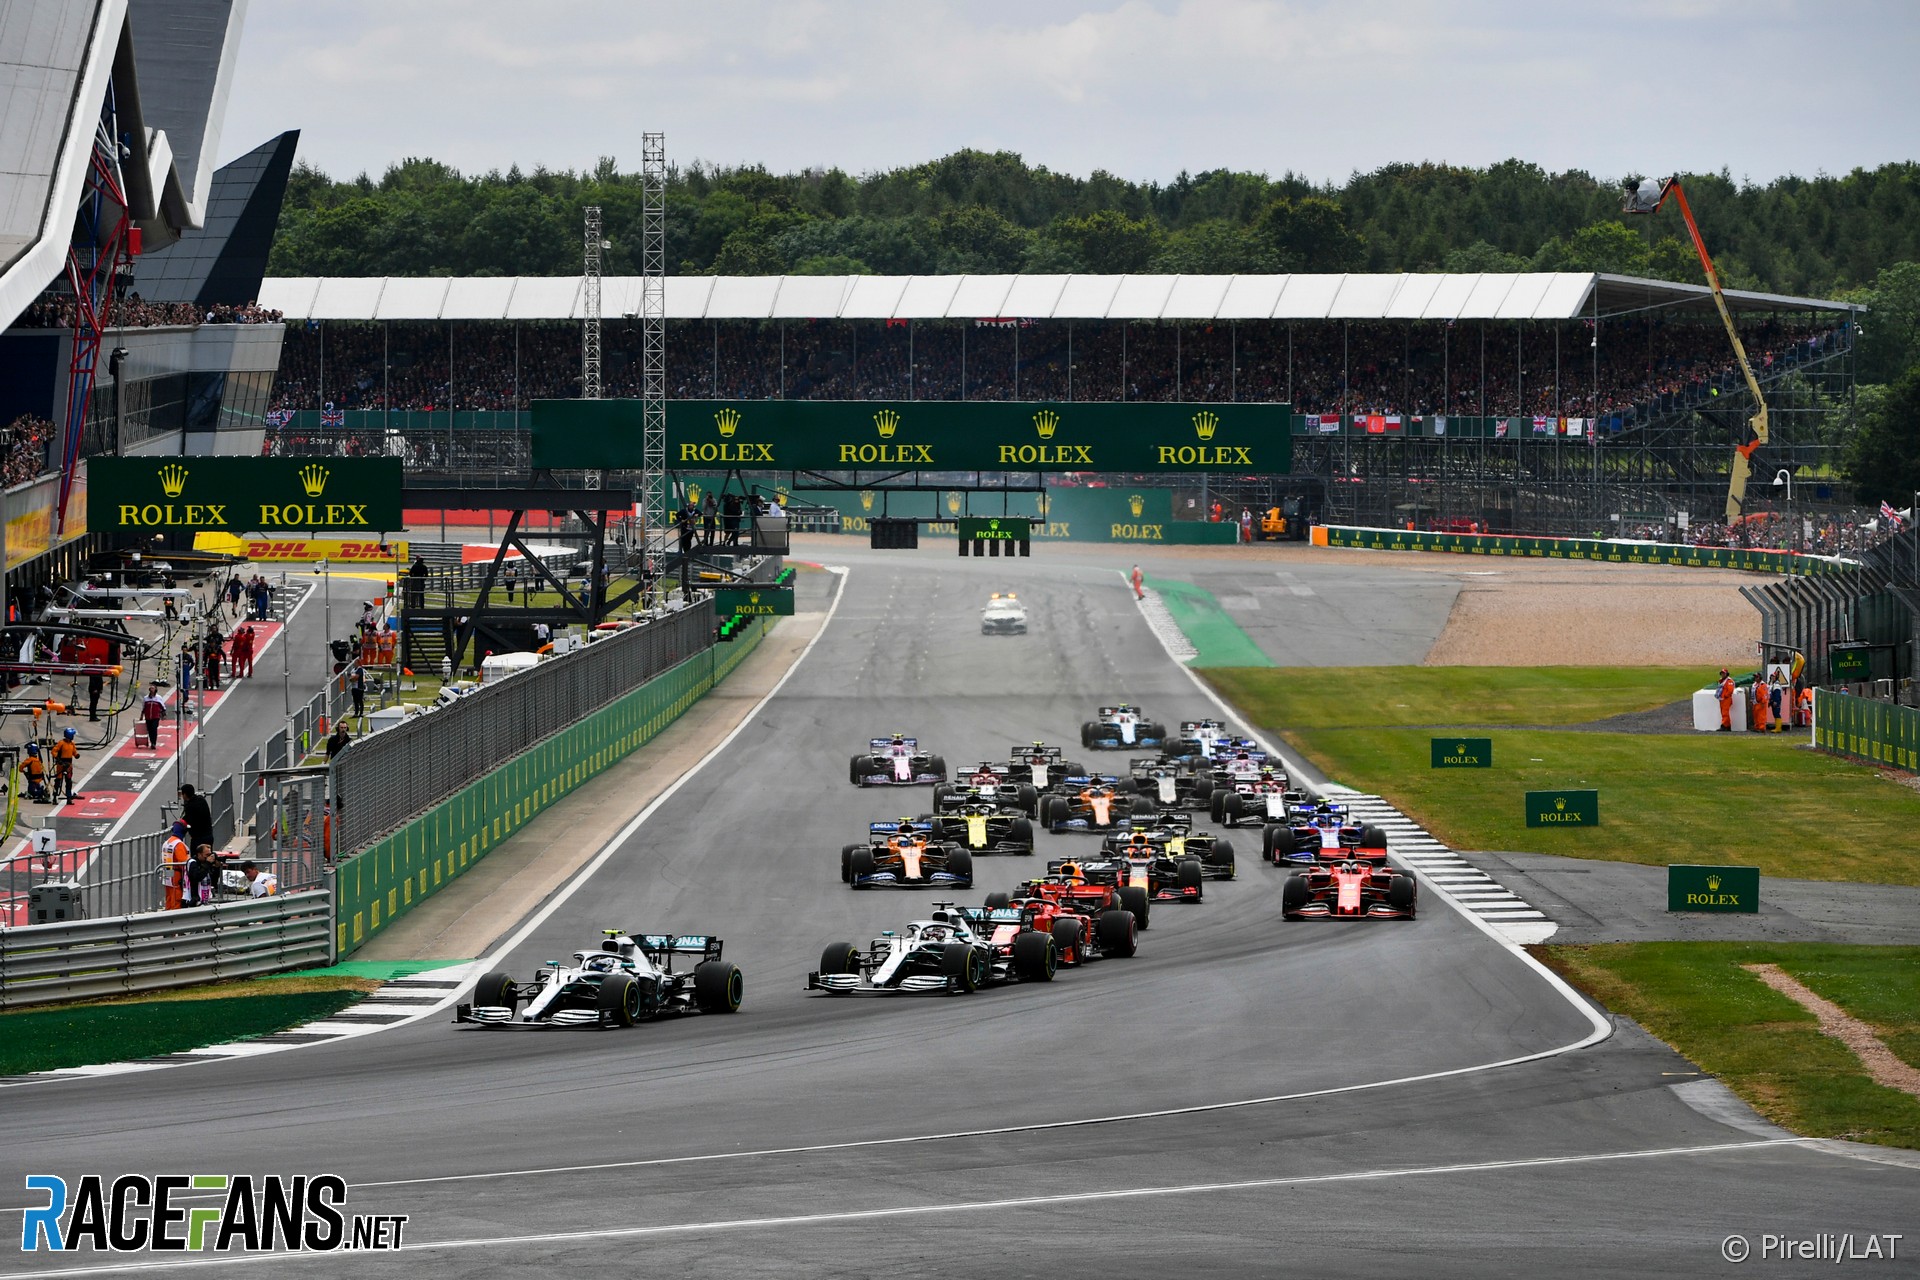 Silverstone says it has agreement to hold two F1 races this year